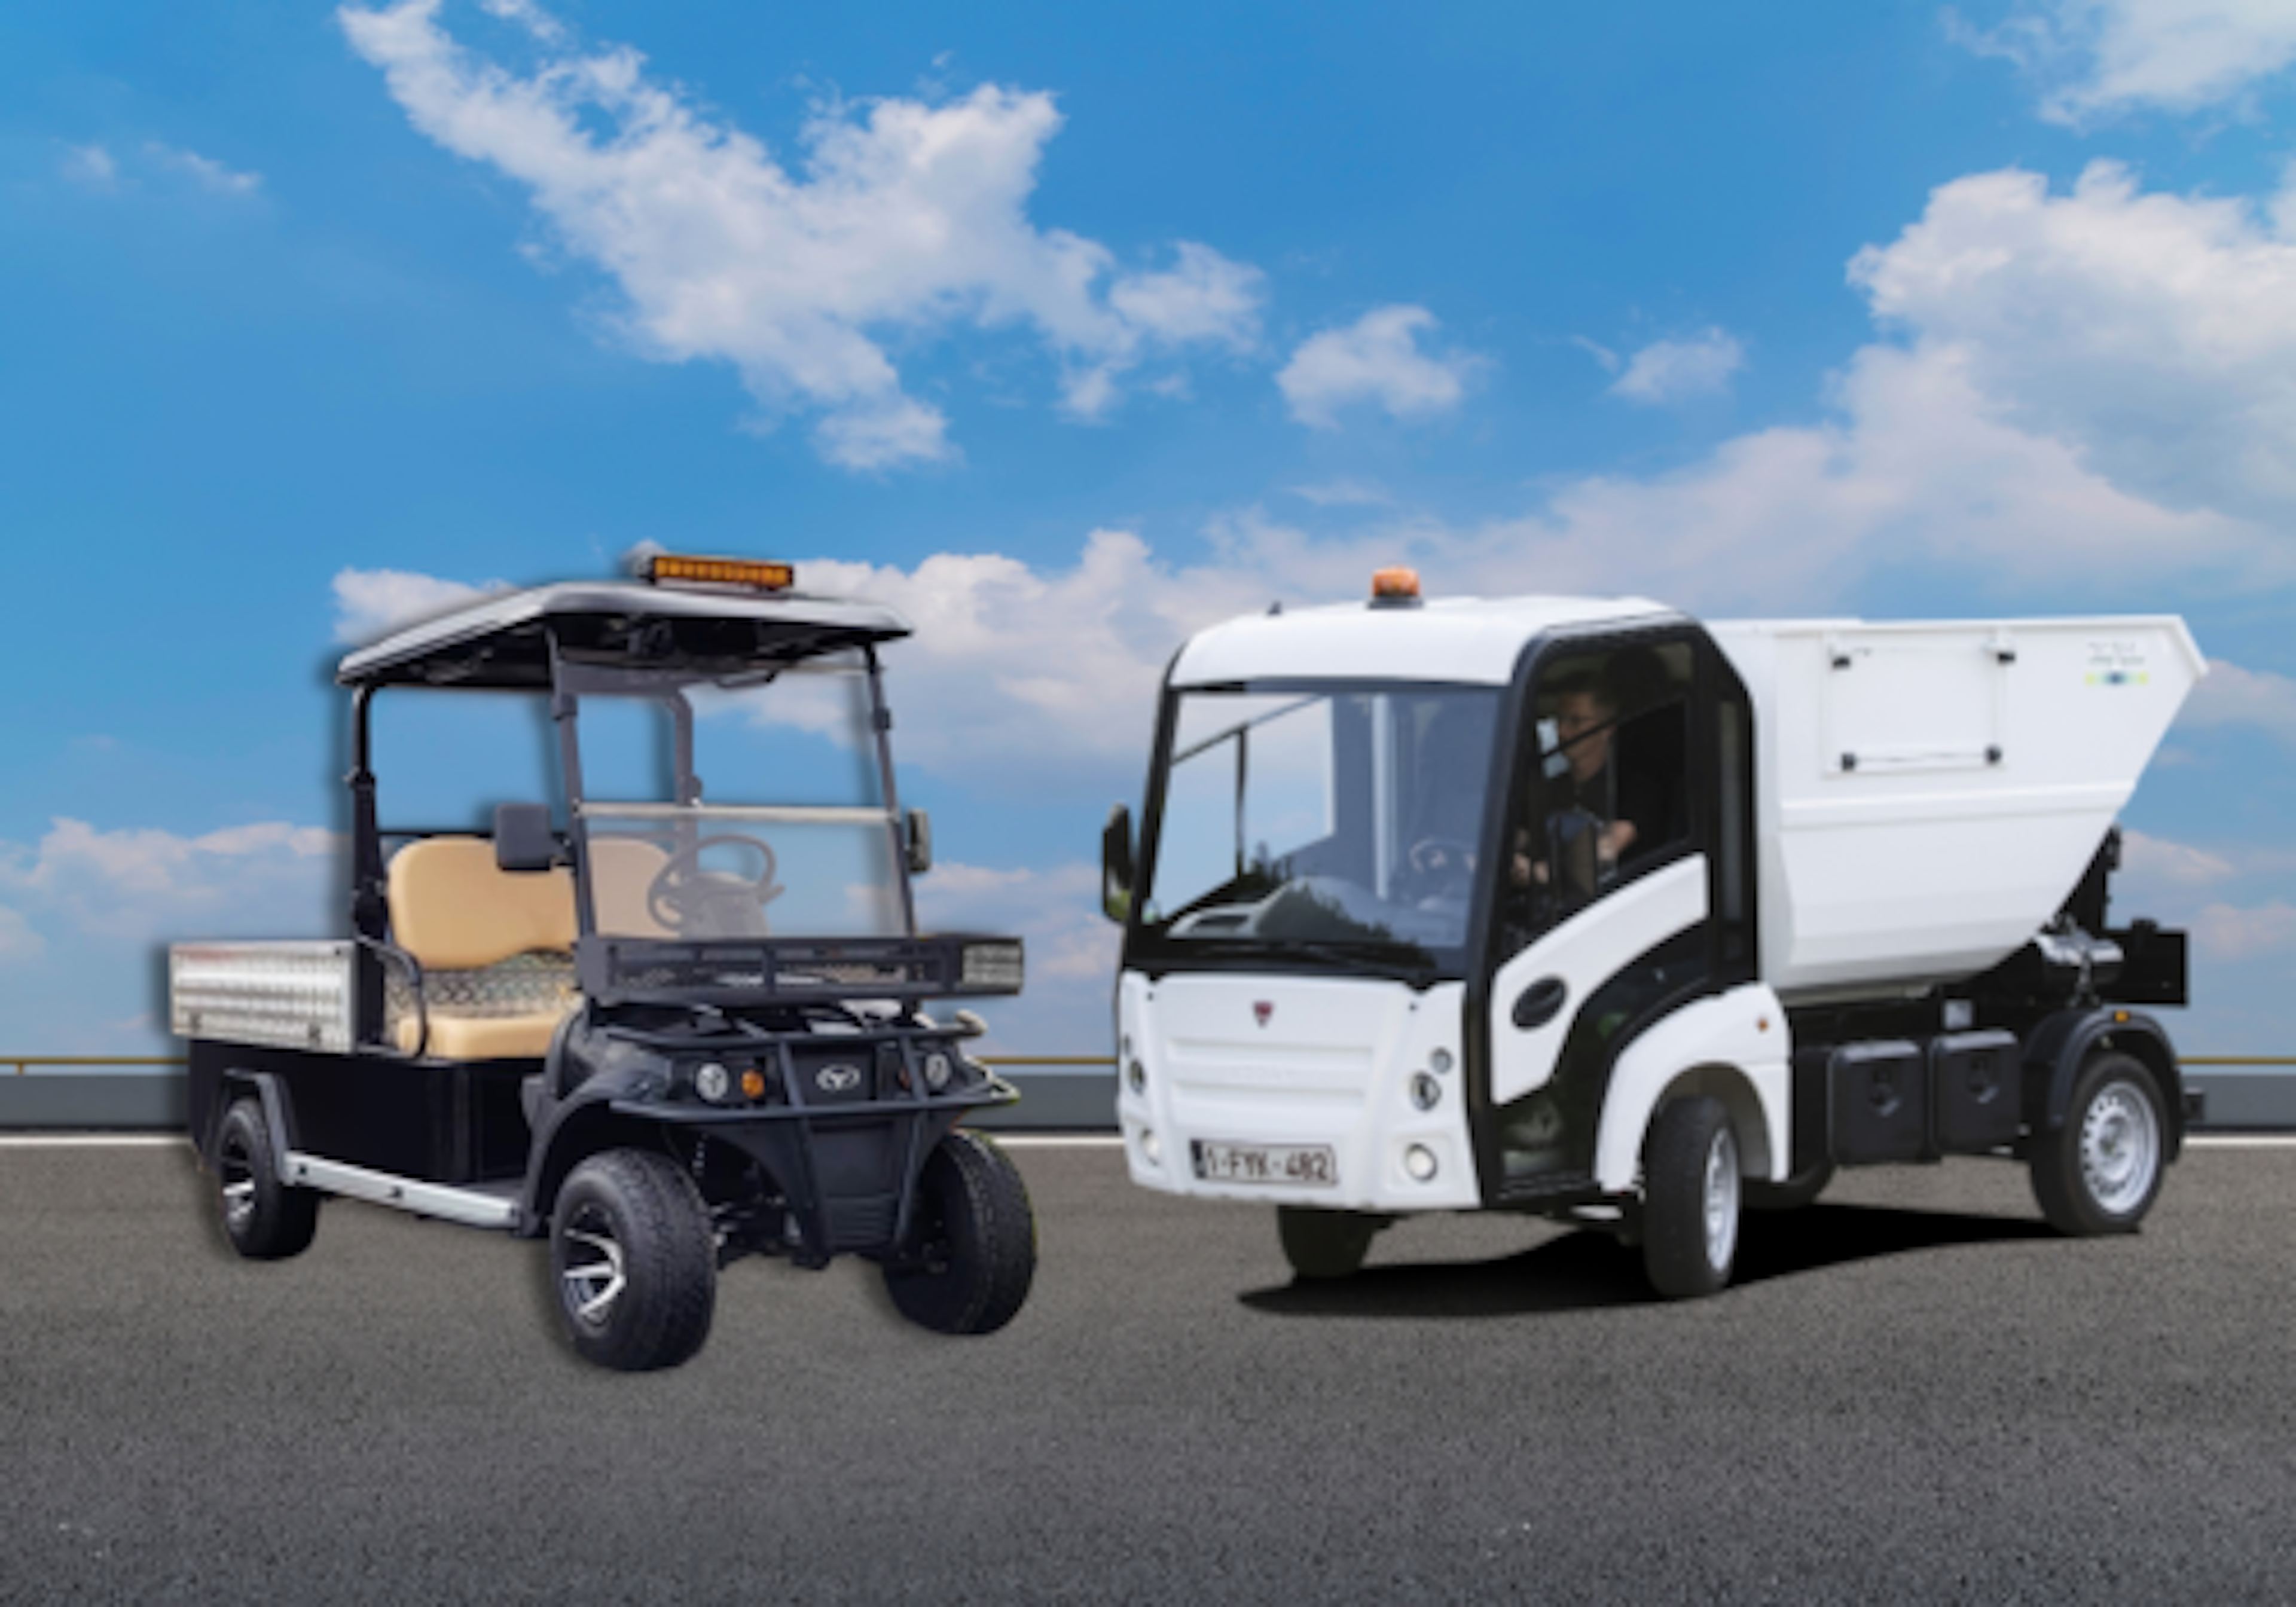 What is an Electric Utility Vehicle?